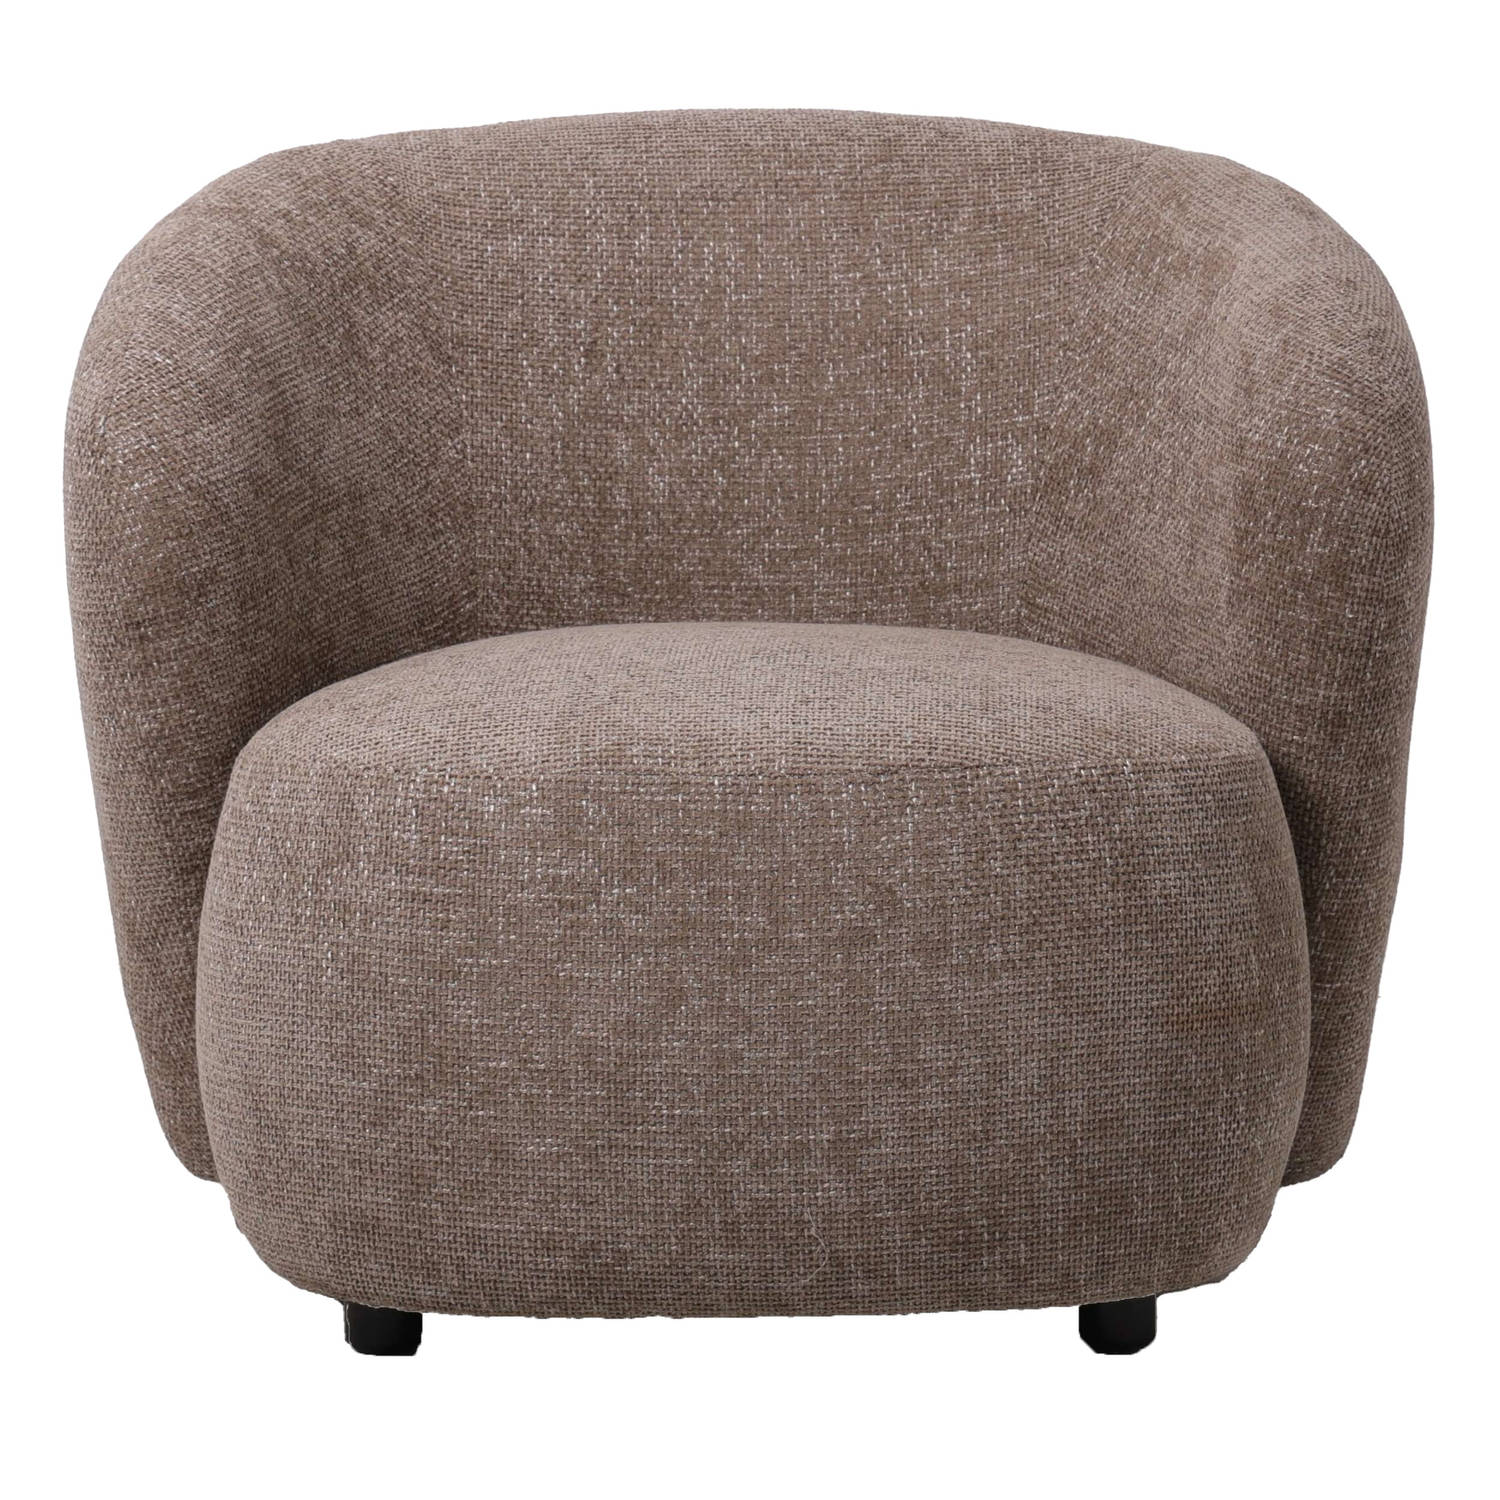 PTMD Aphrodite Taupe fauteuil legacy 3 mink fabric